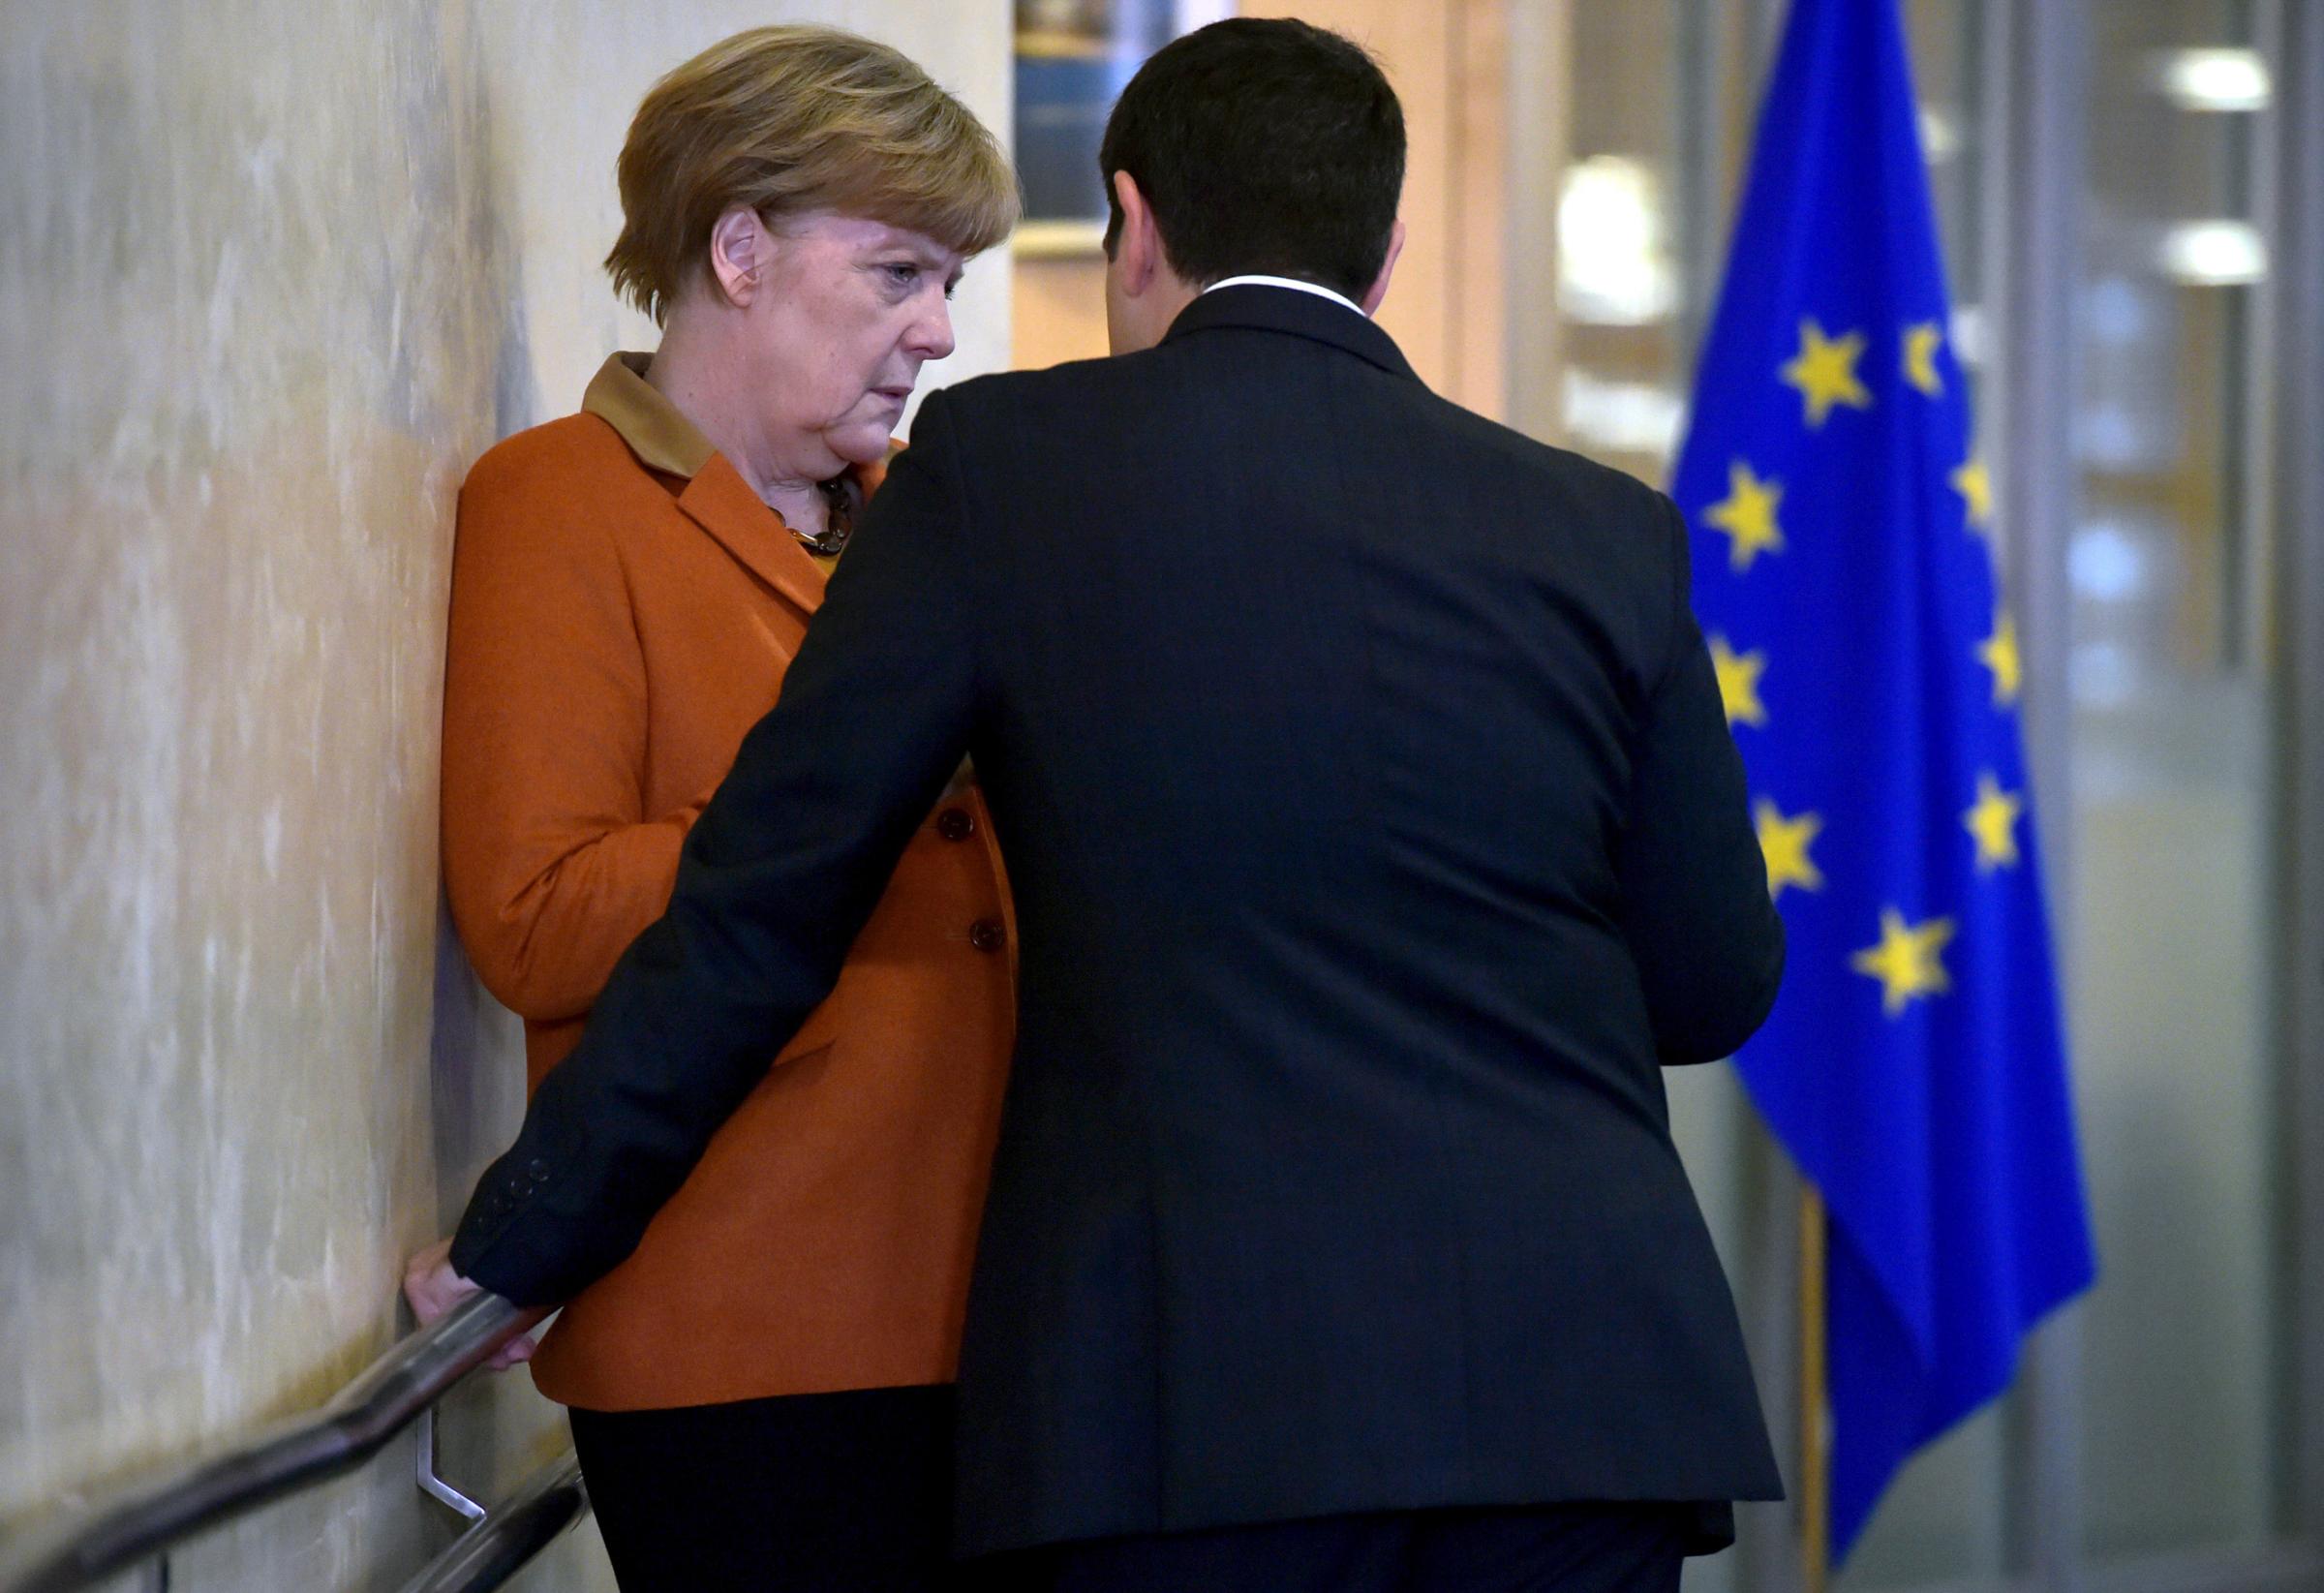 Greece's Prime Minister Alexis Tsipras talks with Germany's Chancellor Angela Merkel prior to a meeting over the Balkan refugee crisis with leaders from central and eastern Europe at the EU Commission headquarters in Brussels on Oct. 25, 2015.